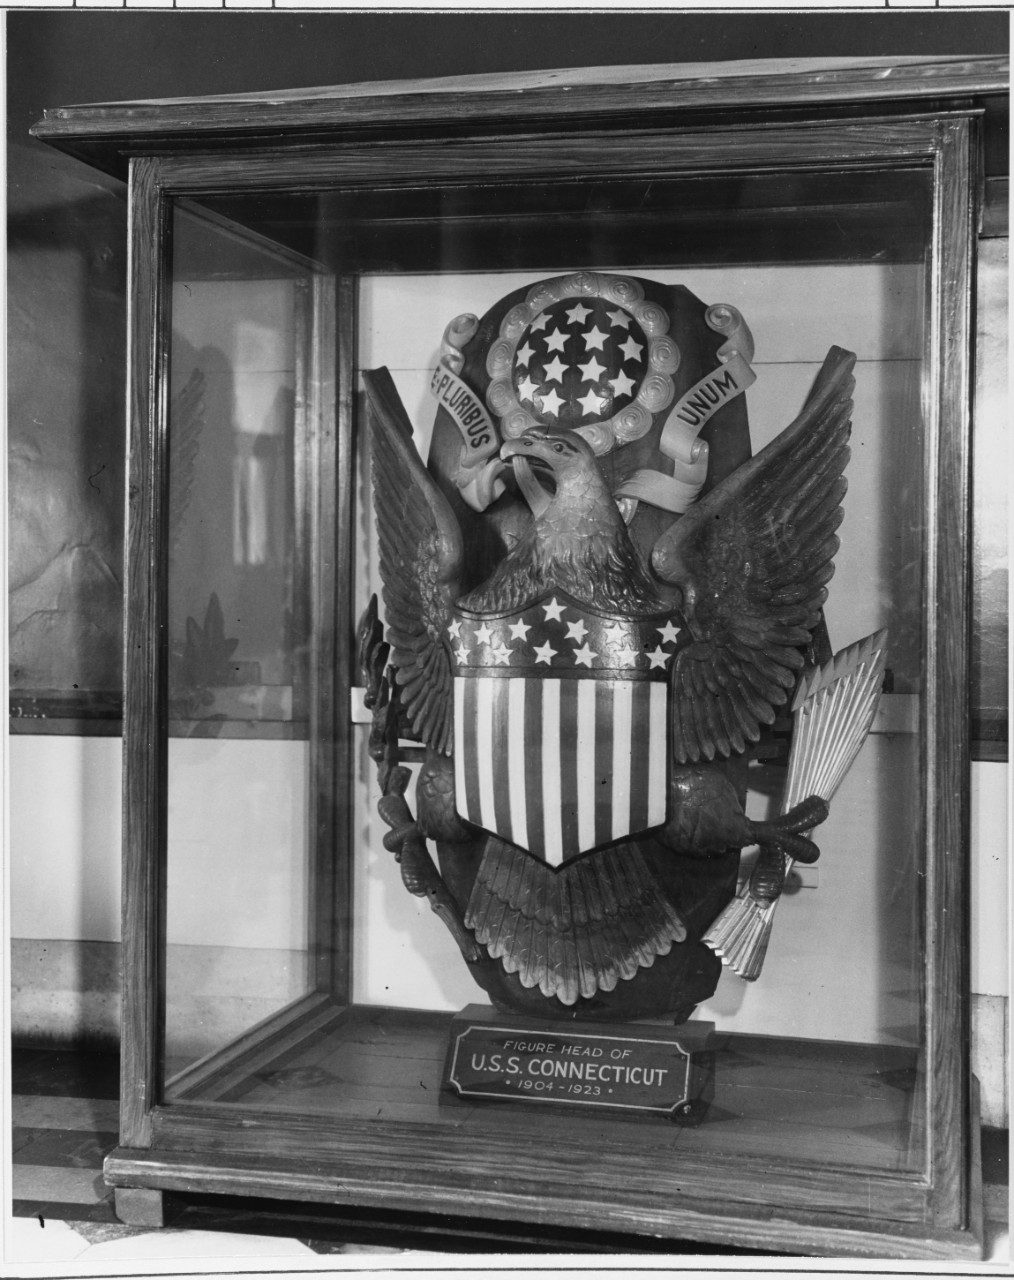 NH 115250: USS Connecticut figurehead. On display in lobby of the state capitol, Hartford, Connecticut. NHHC Photograph Collection.